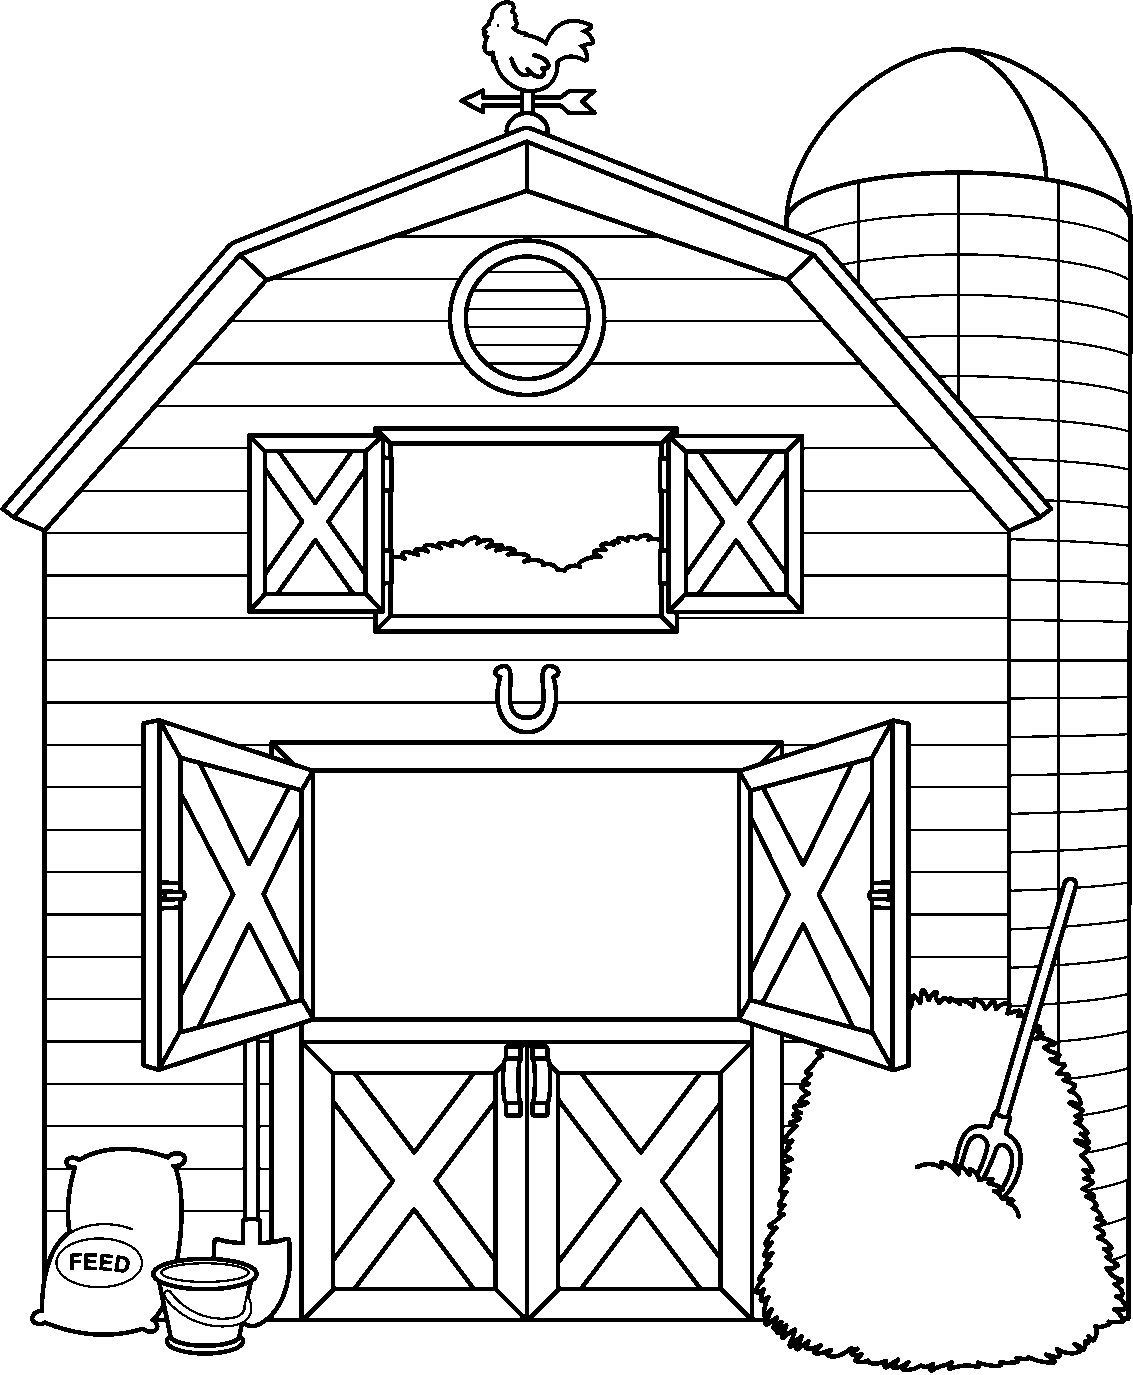 Free black and white barn clipart.